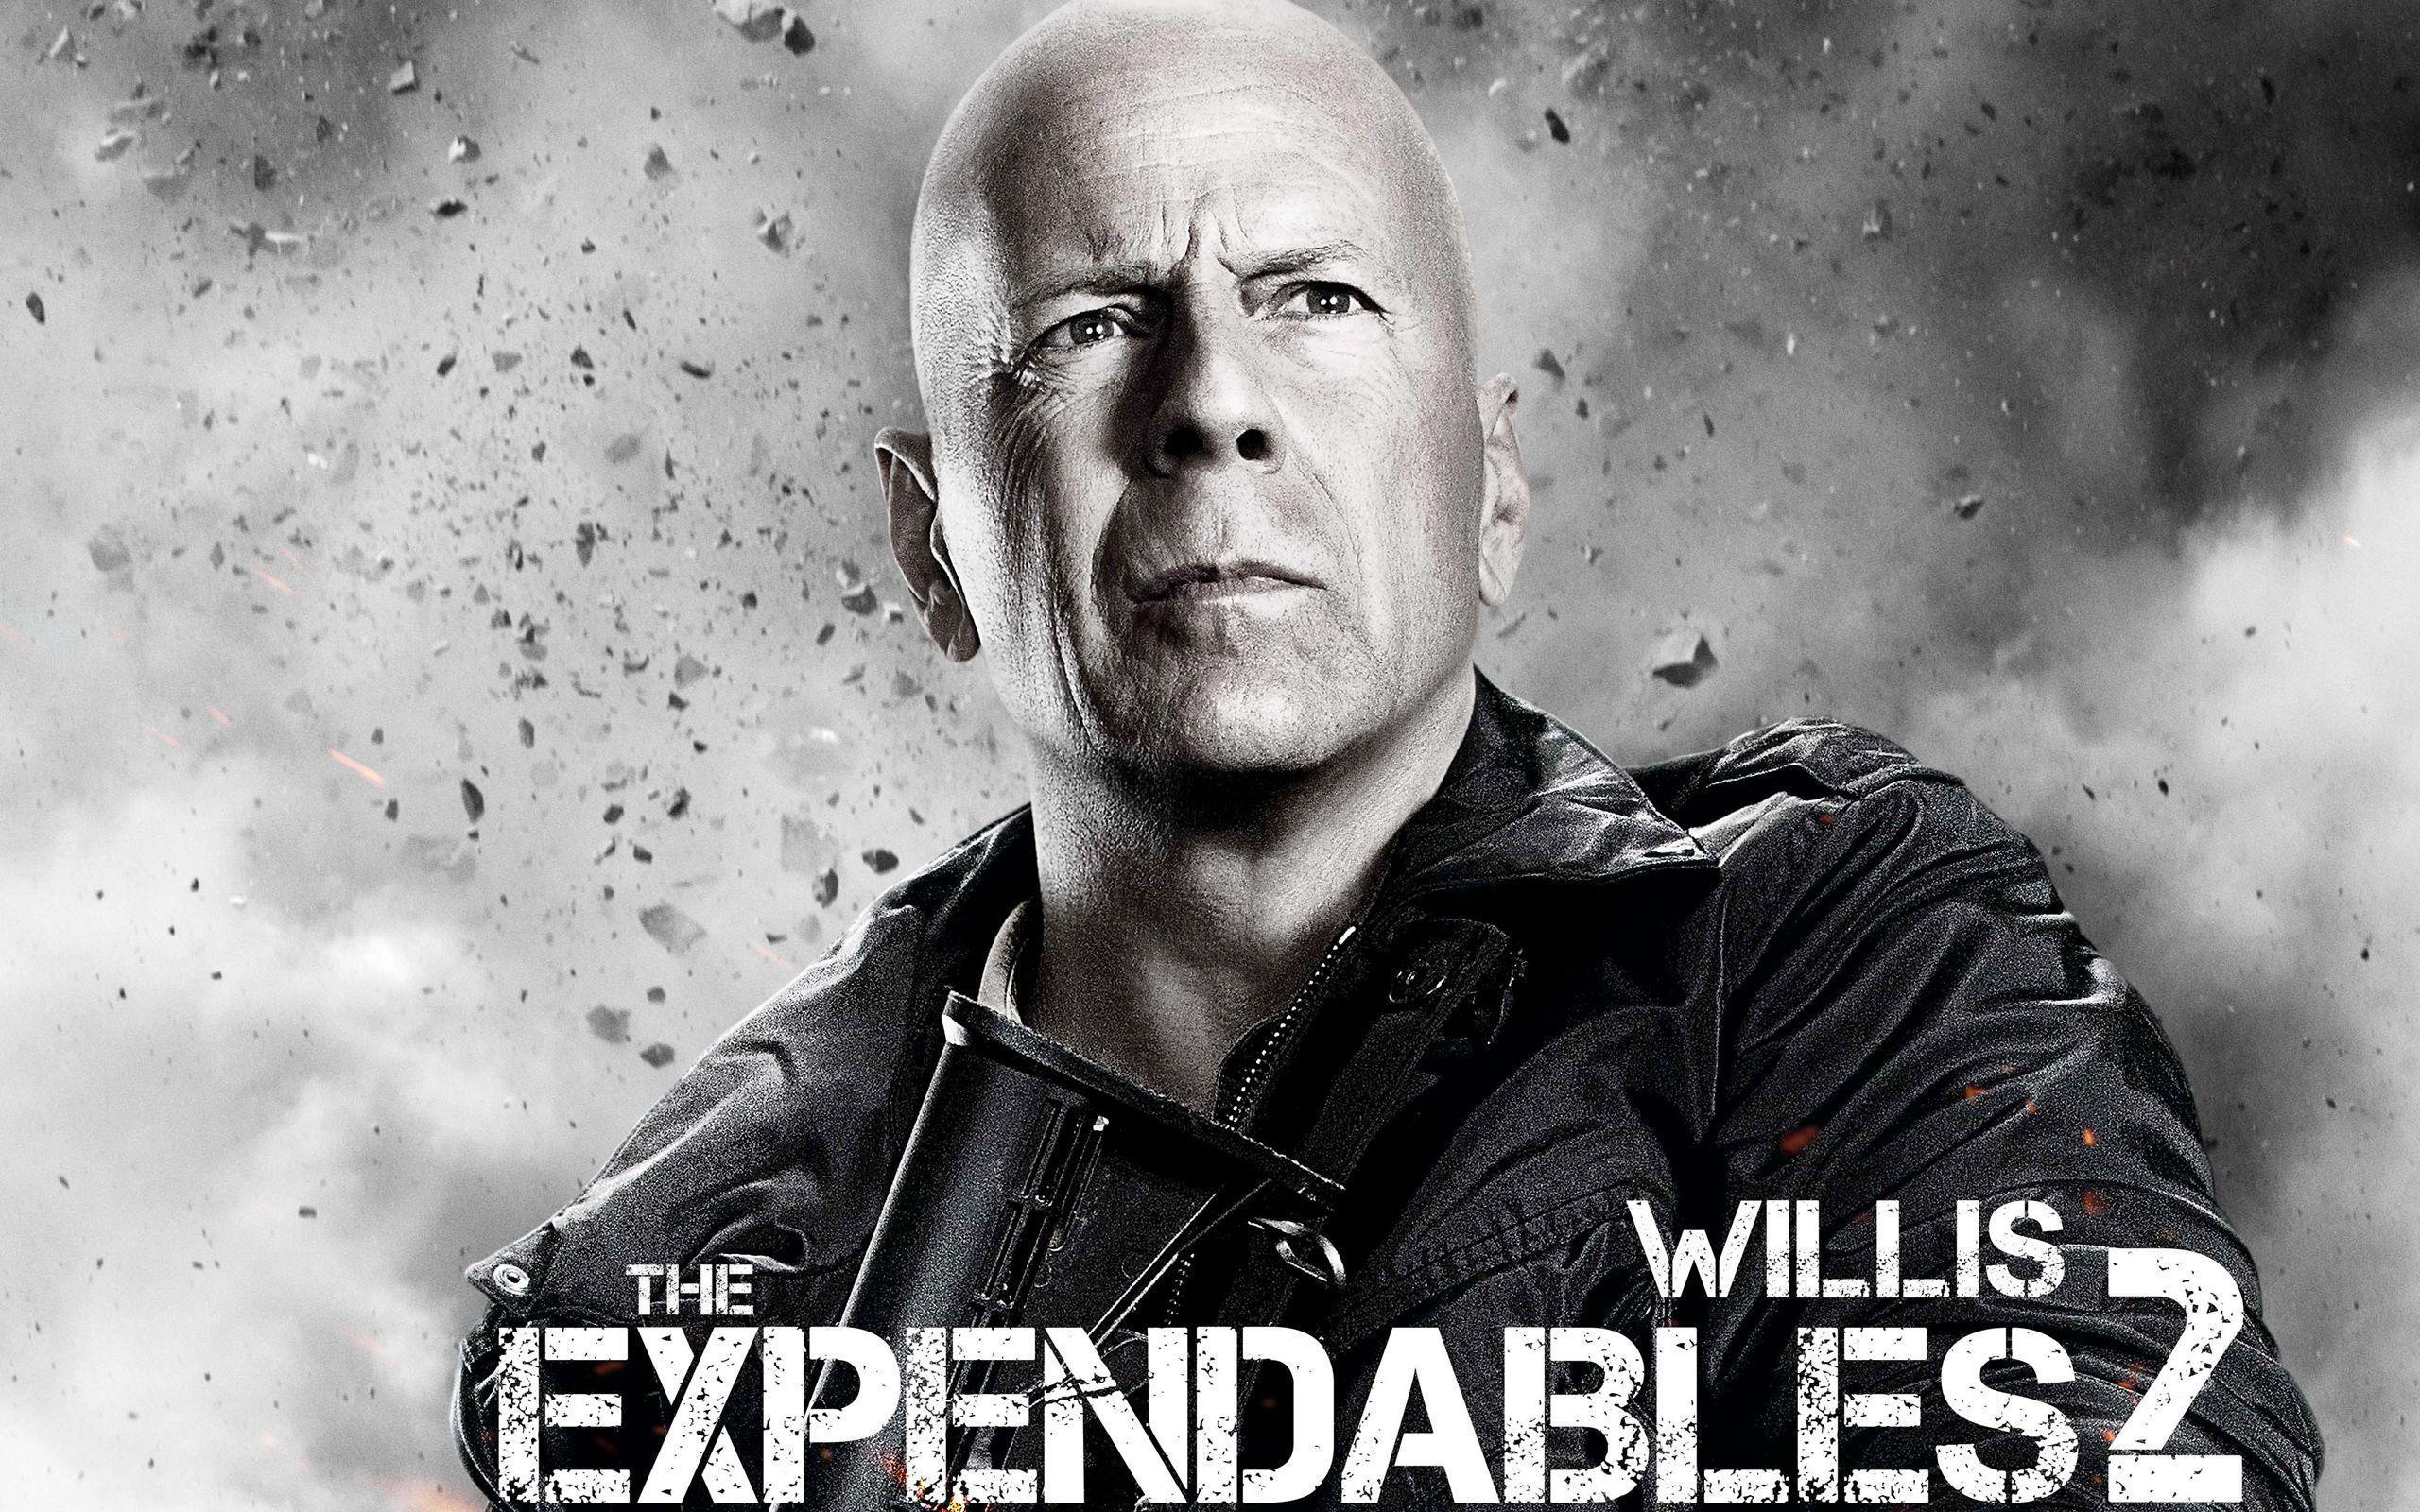 Bruce Willis in Expendables 2 Wallpaper